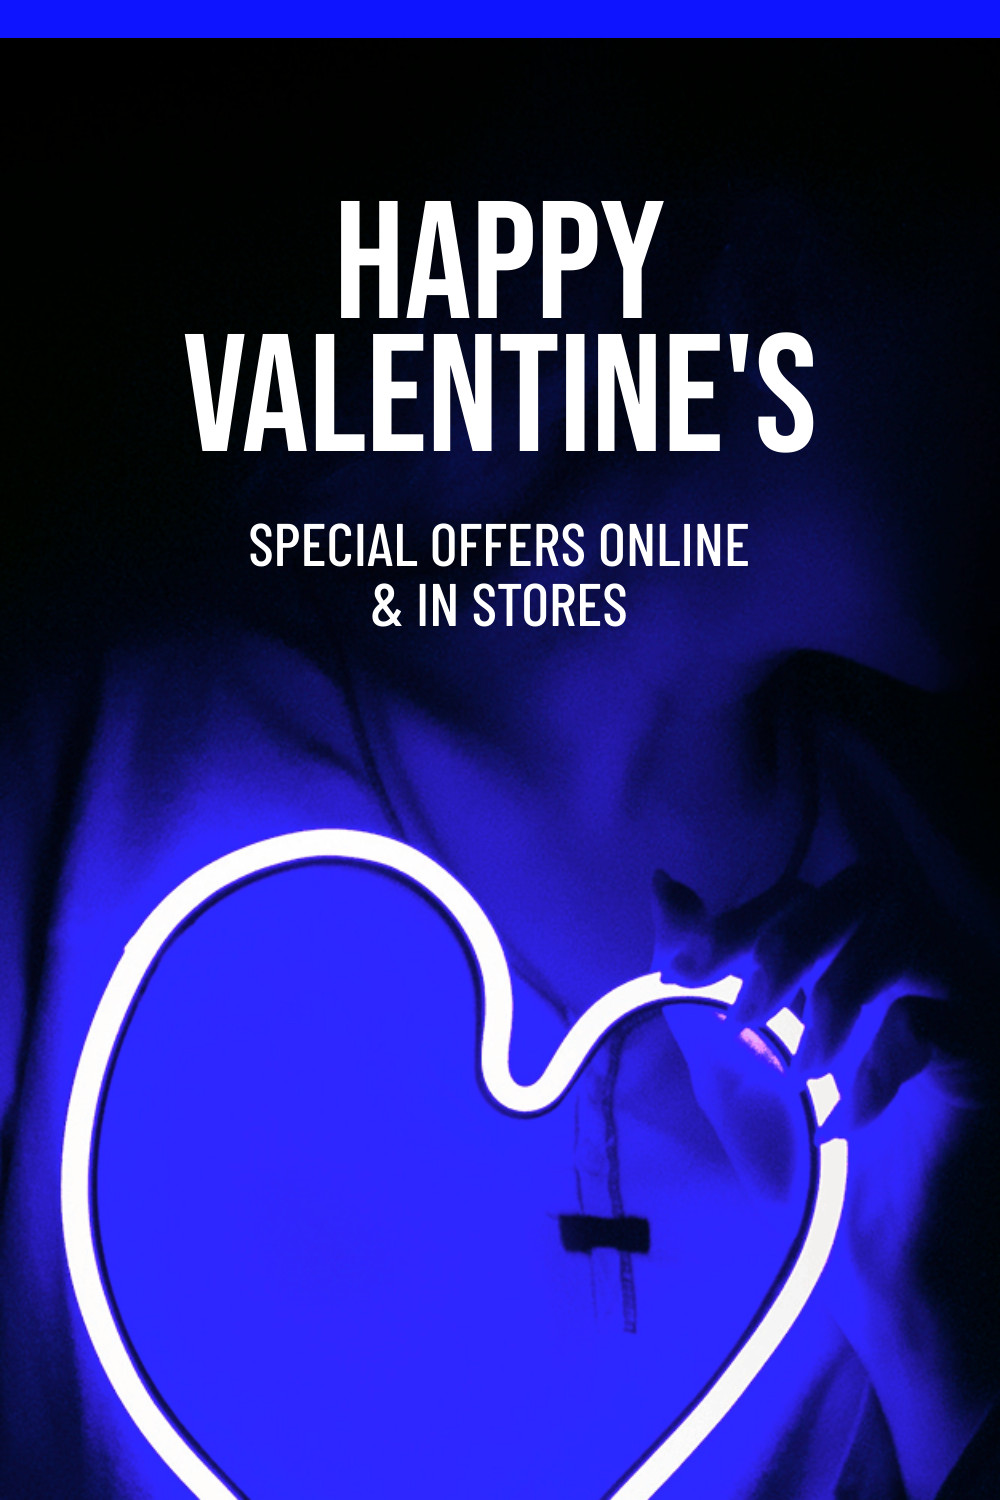 Blue Happy Valentine's Day Offers